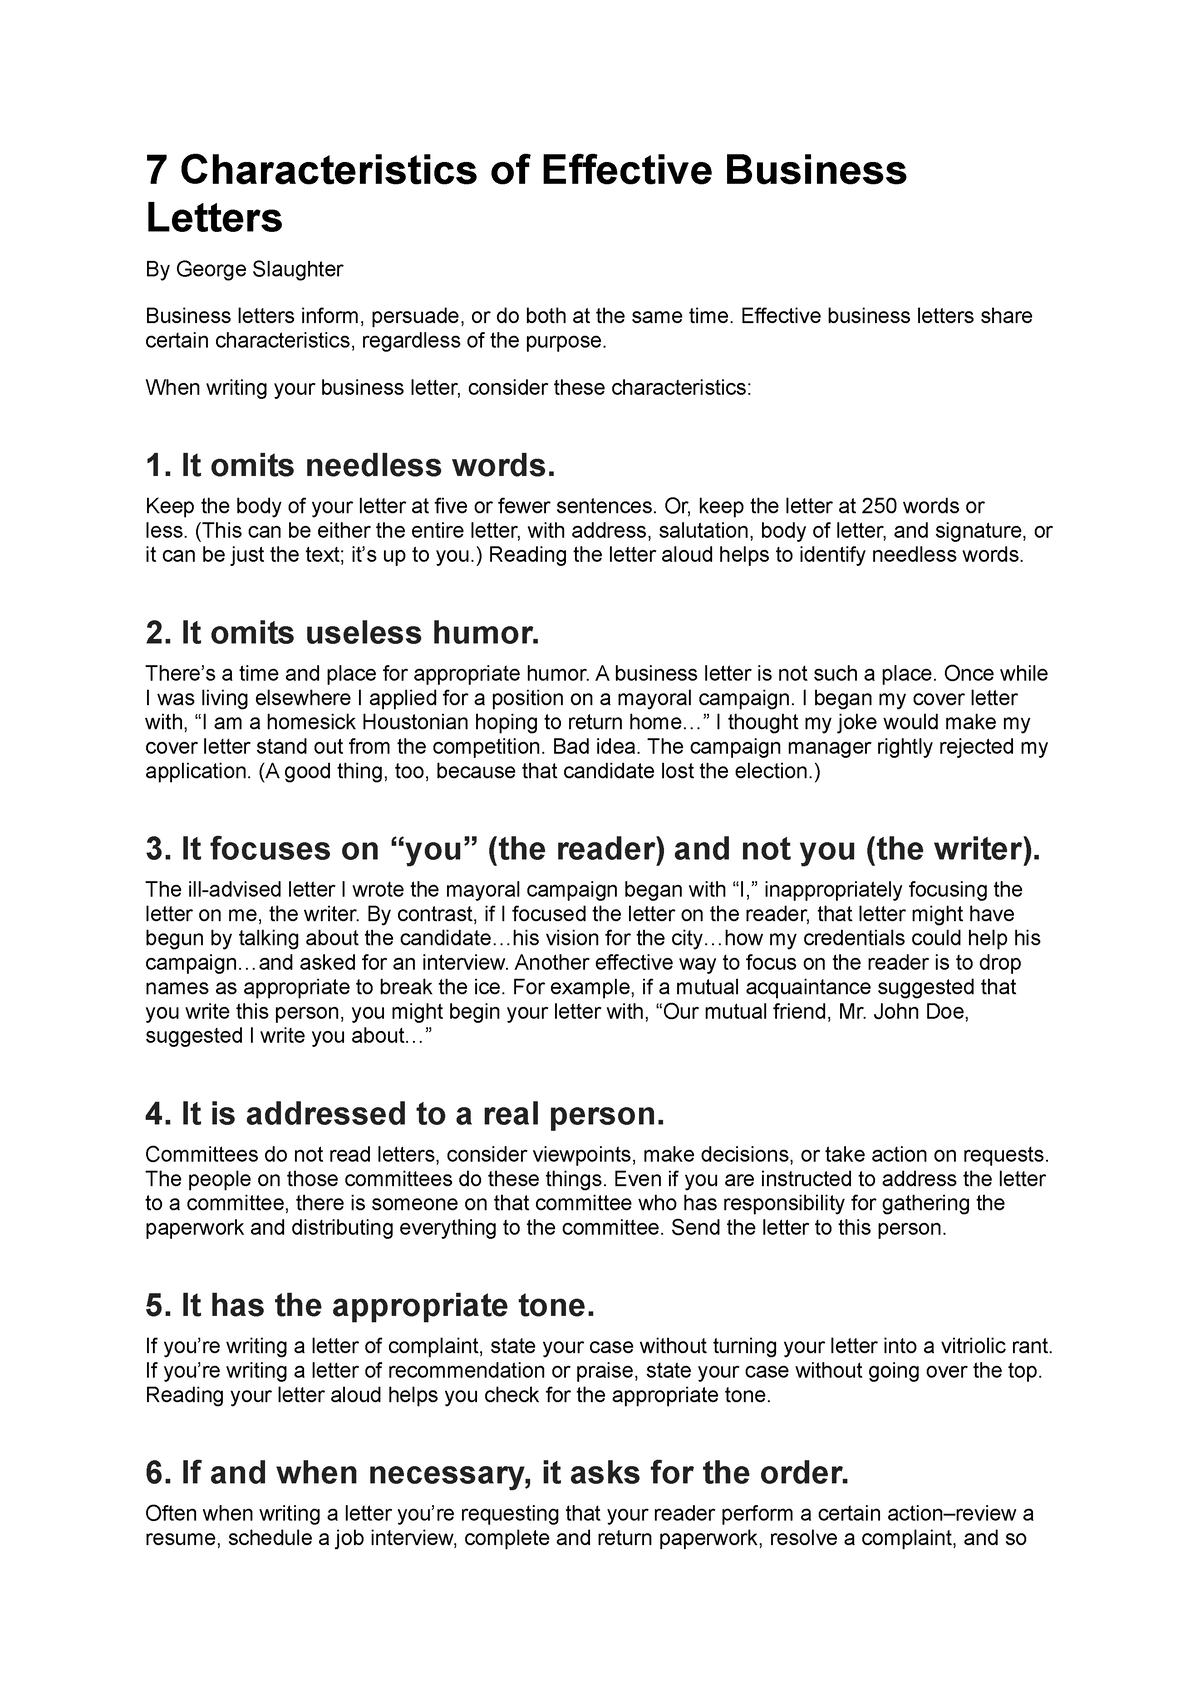 7-characteristics-of-effective-business-letters-effective-business